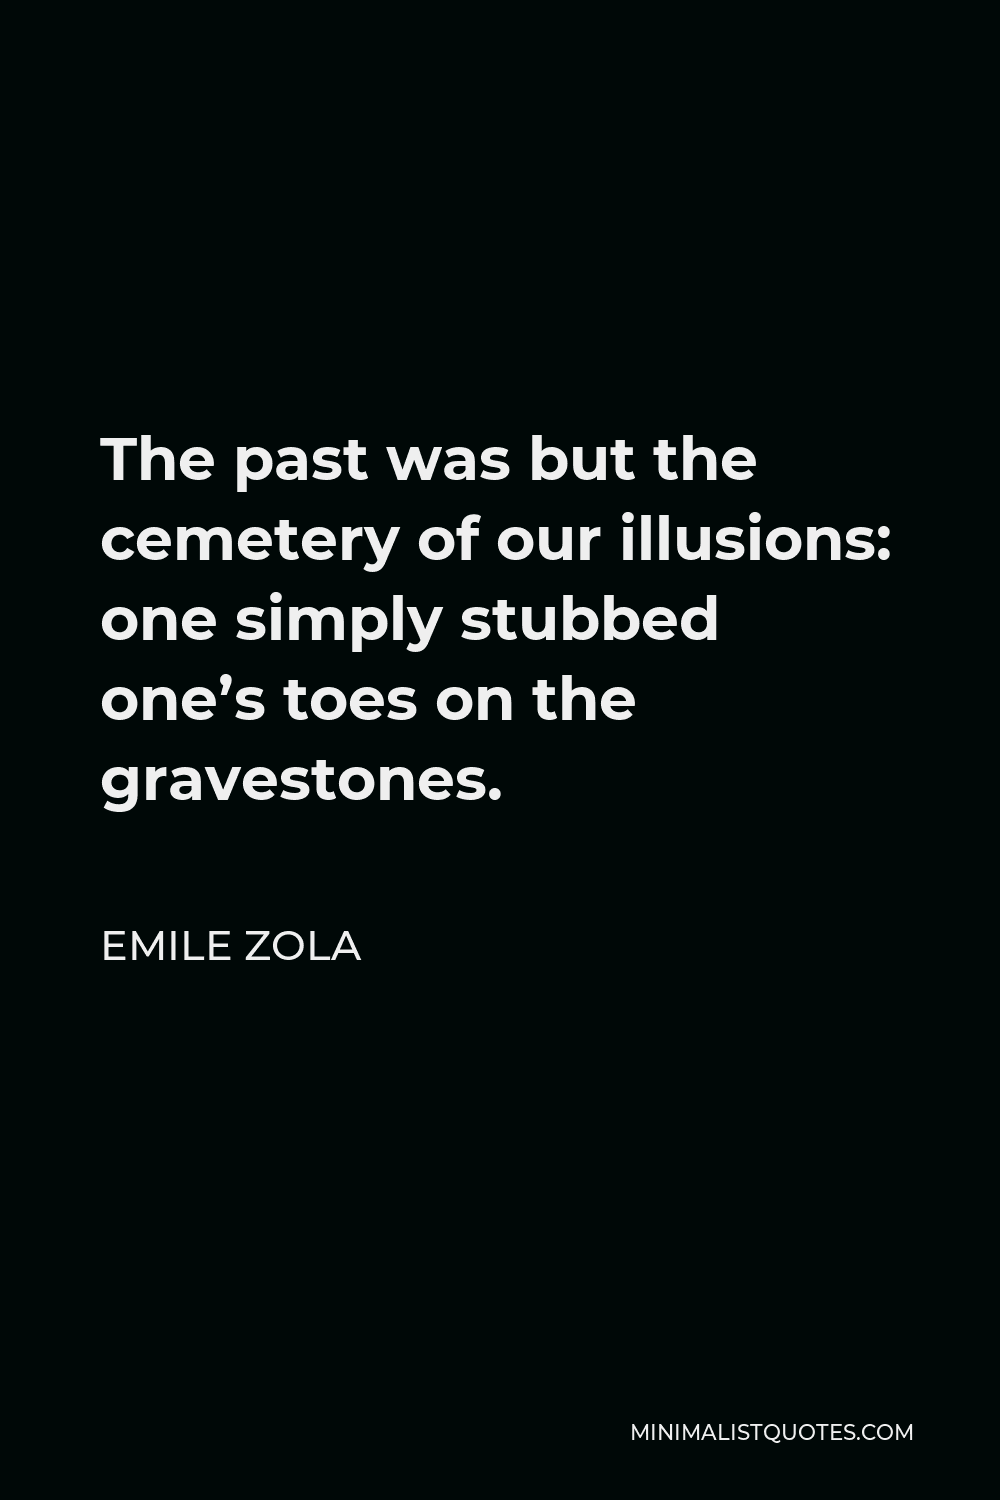 Emile Zola Quote - The past was but the cemetery of our illusions: one simply stubbed one’s toes on the gravestones.